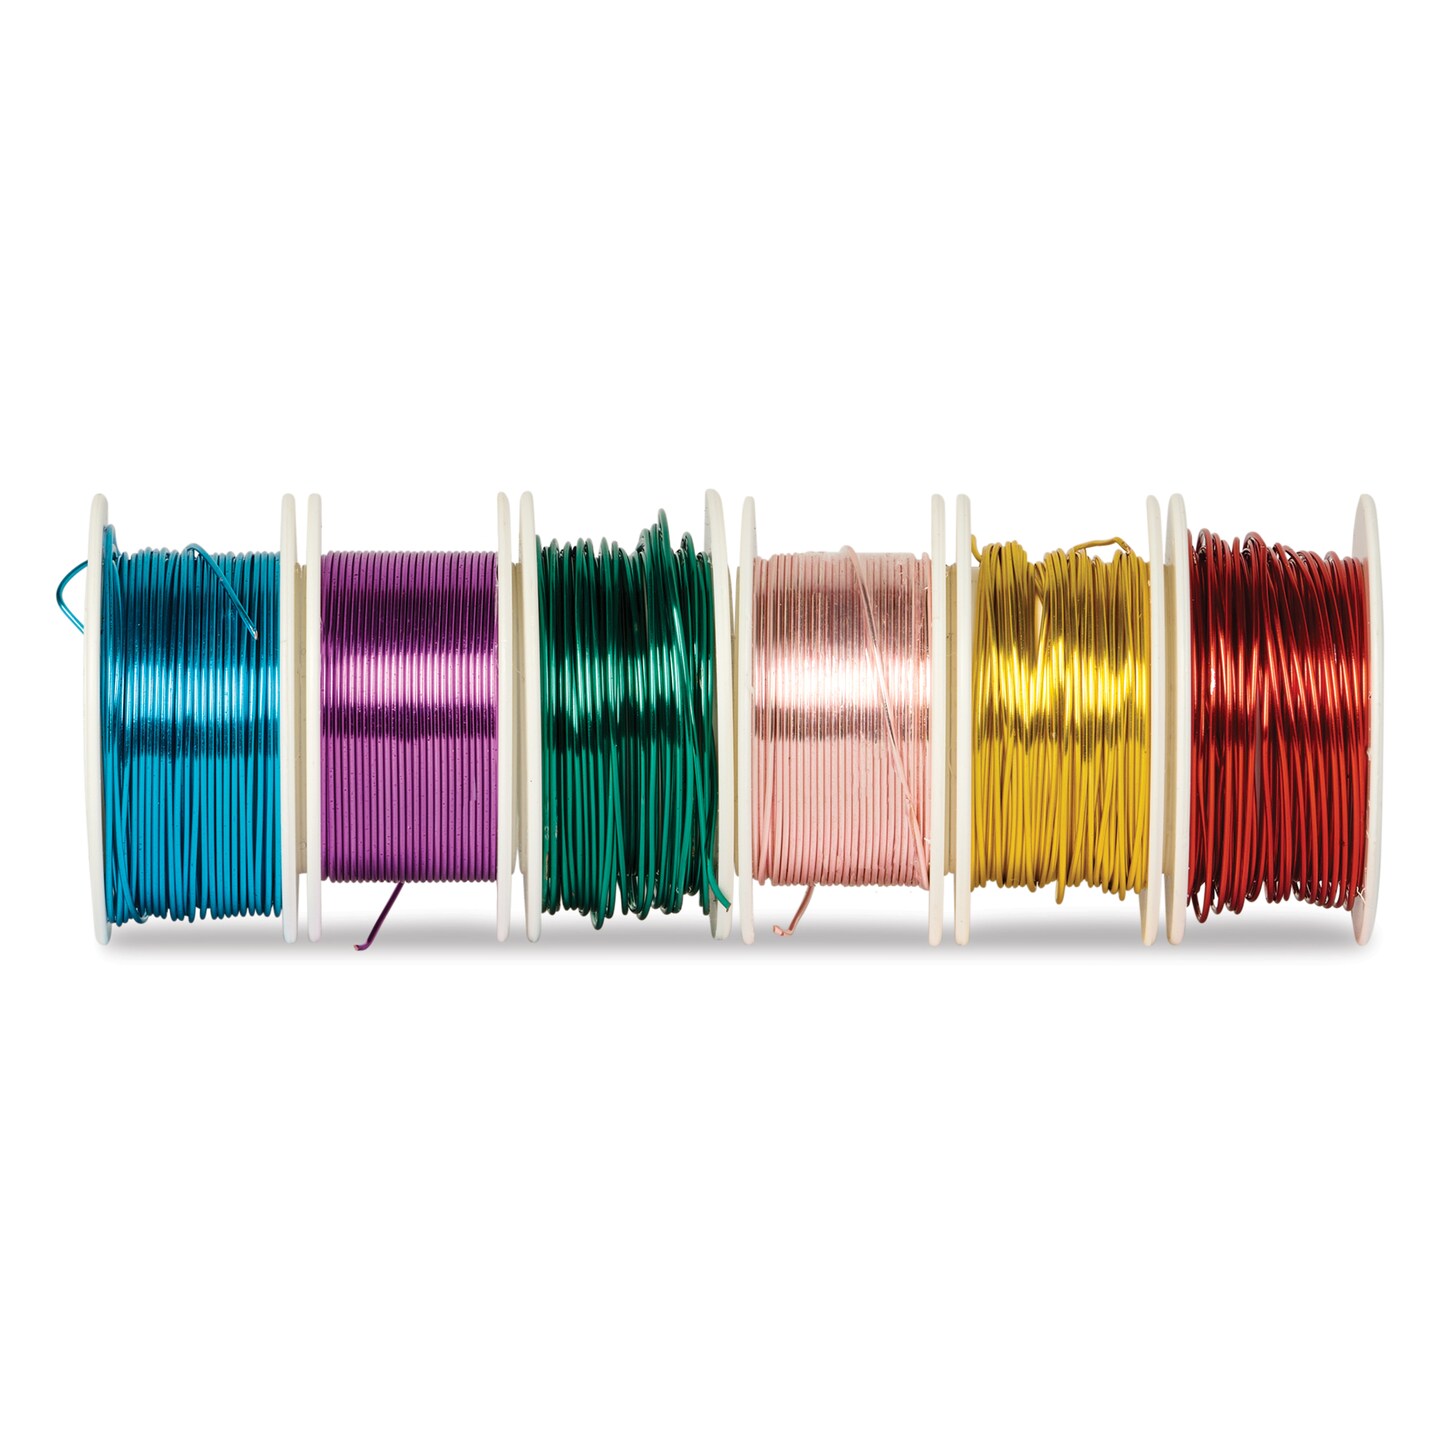 Silver Plated Copper Wire - Bright Colors, Set of 6 Spools, 22 Gauge x 15 ft